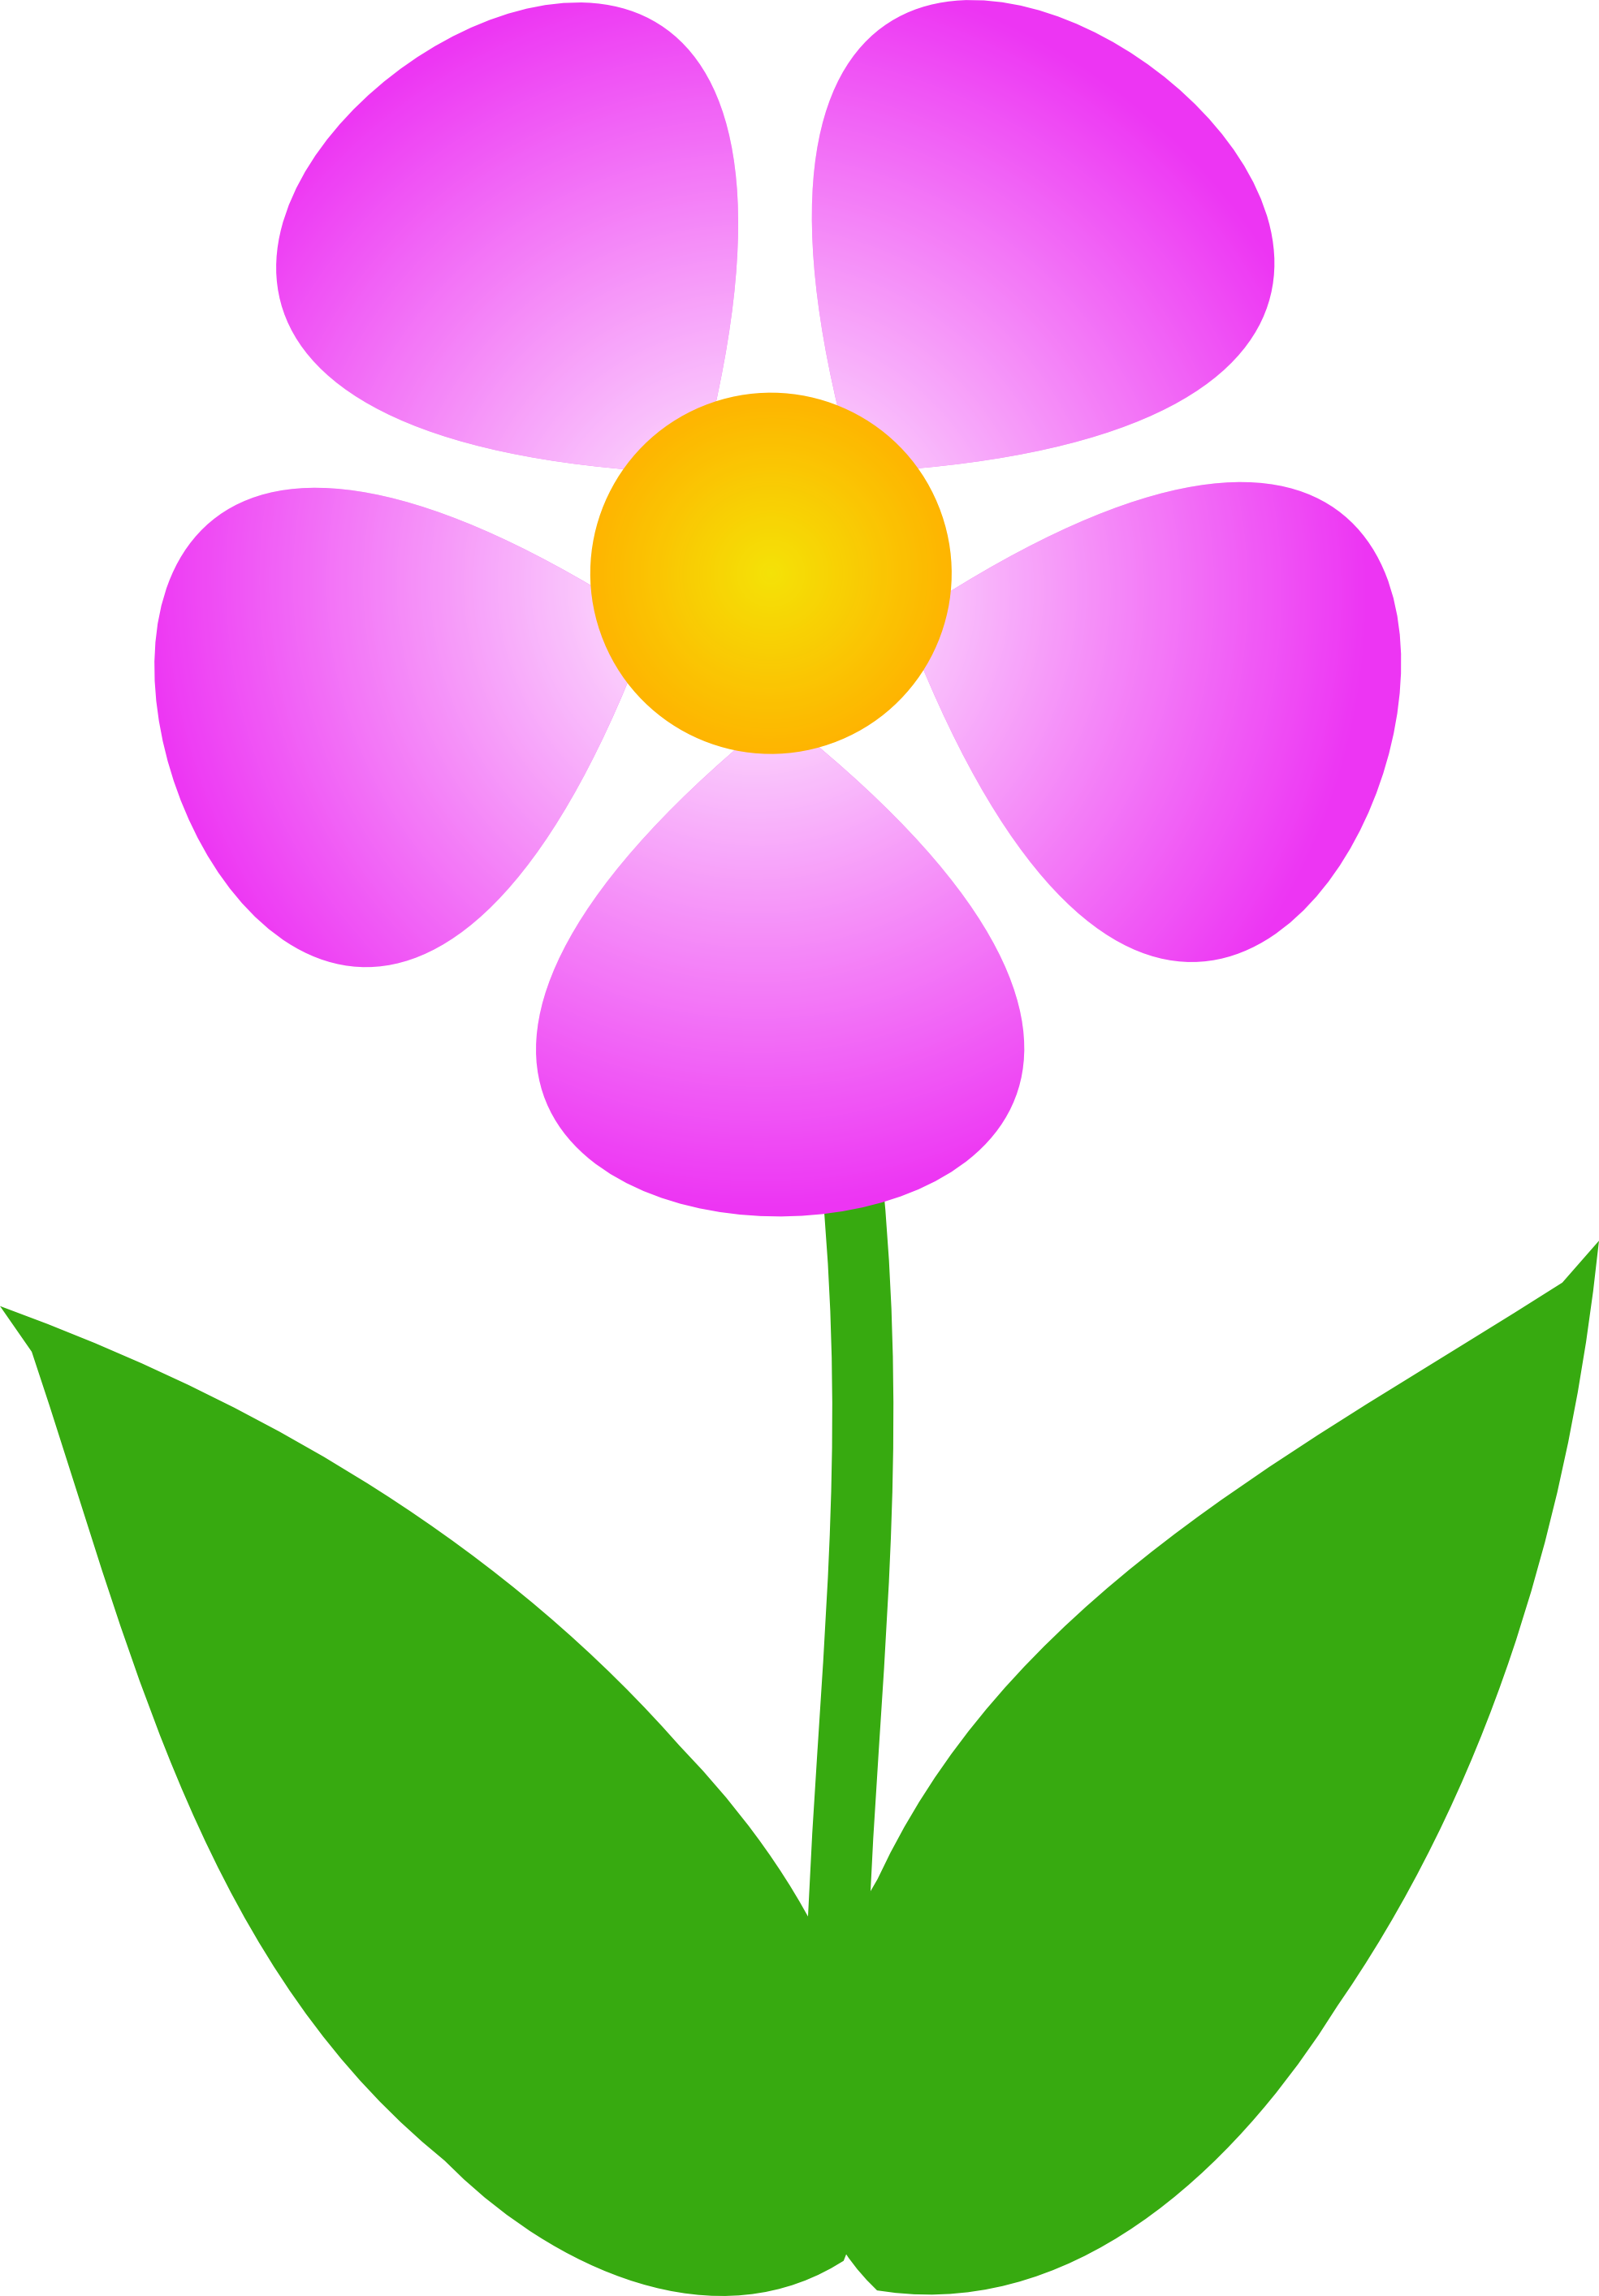 Free clipart images of flower - Flower Images Clip Art